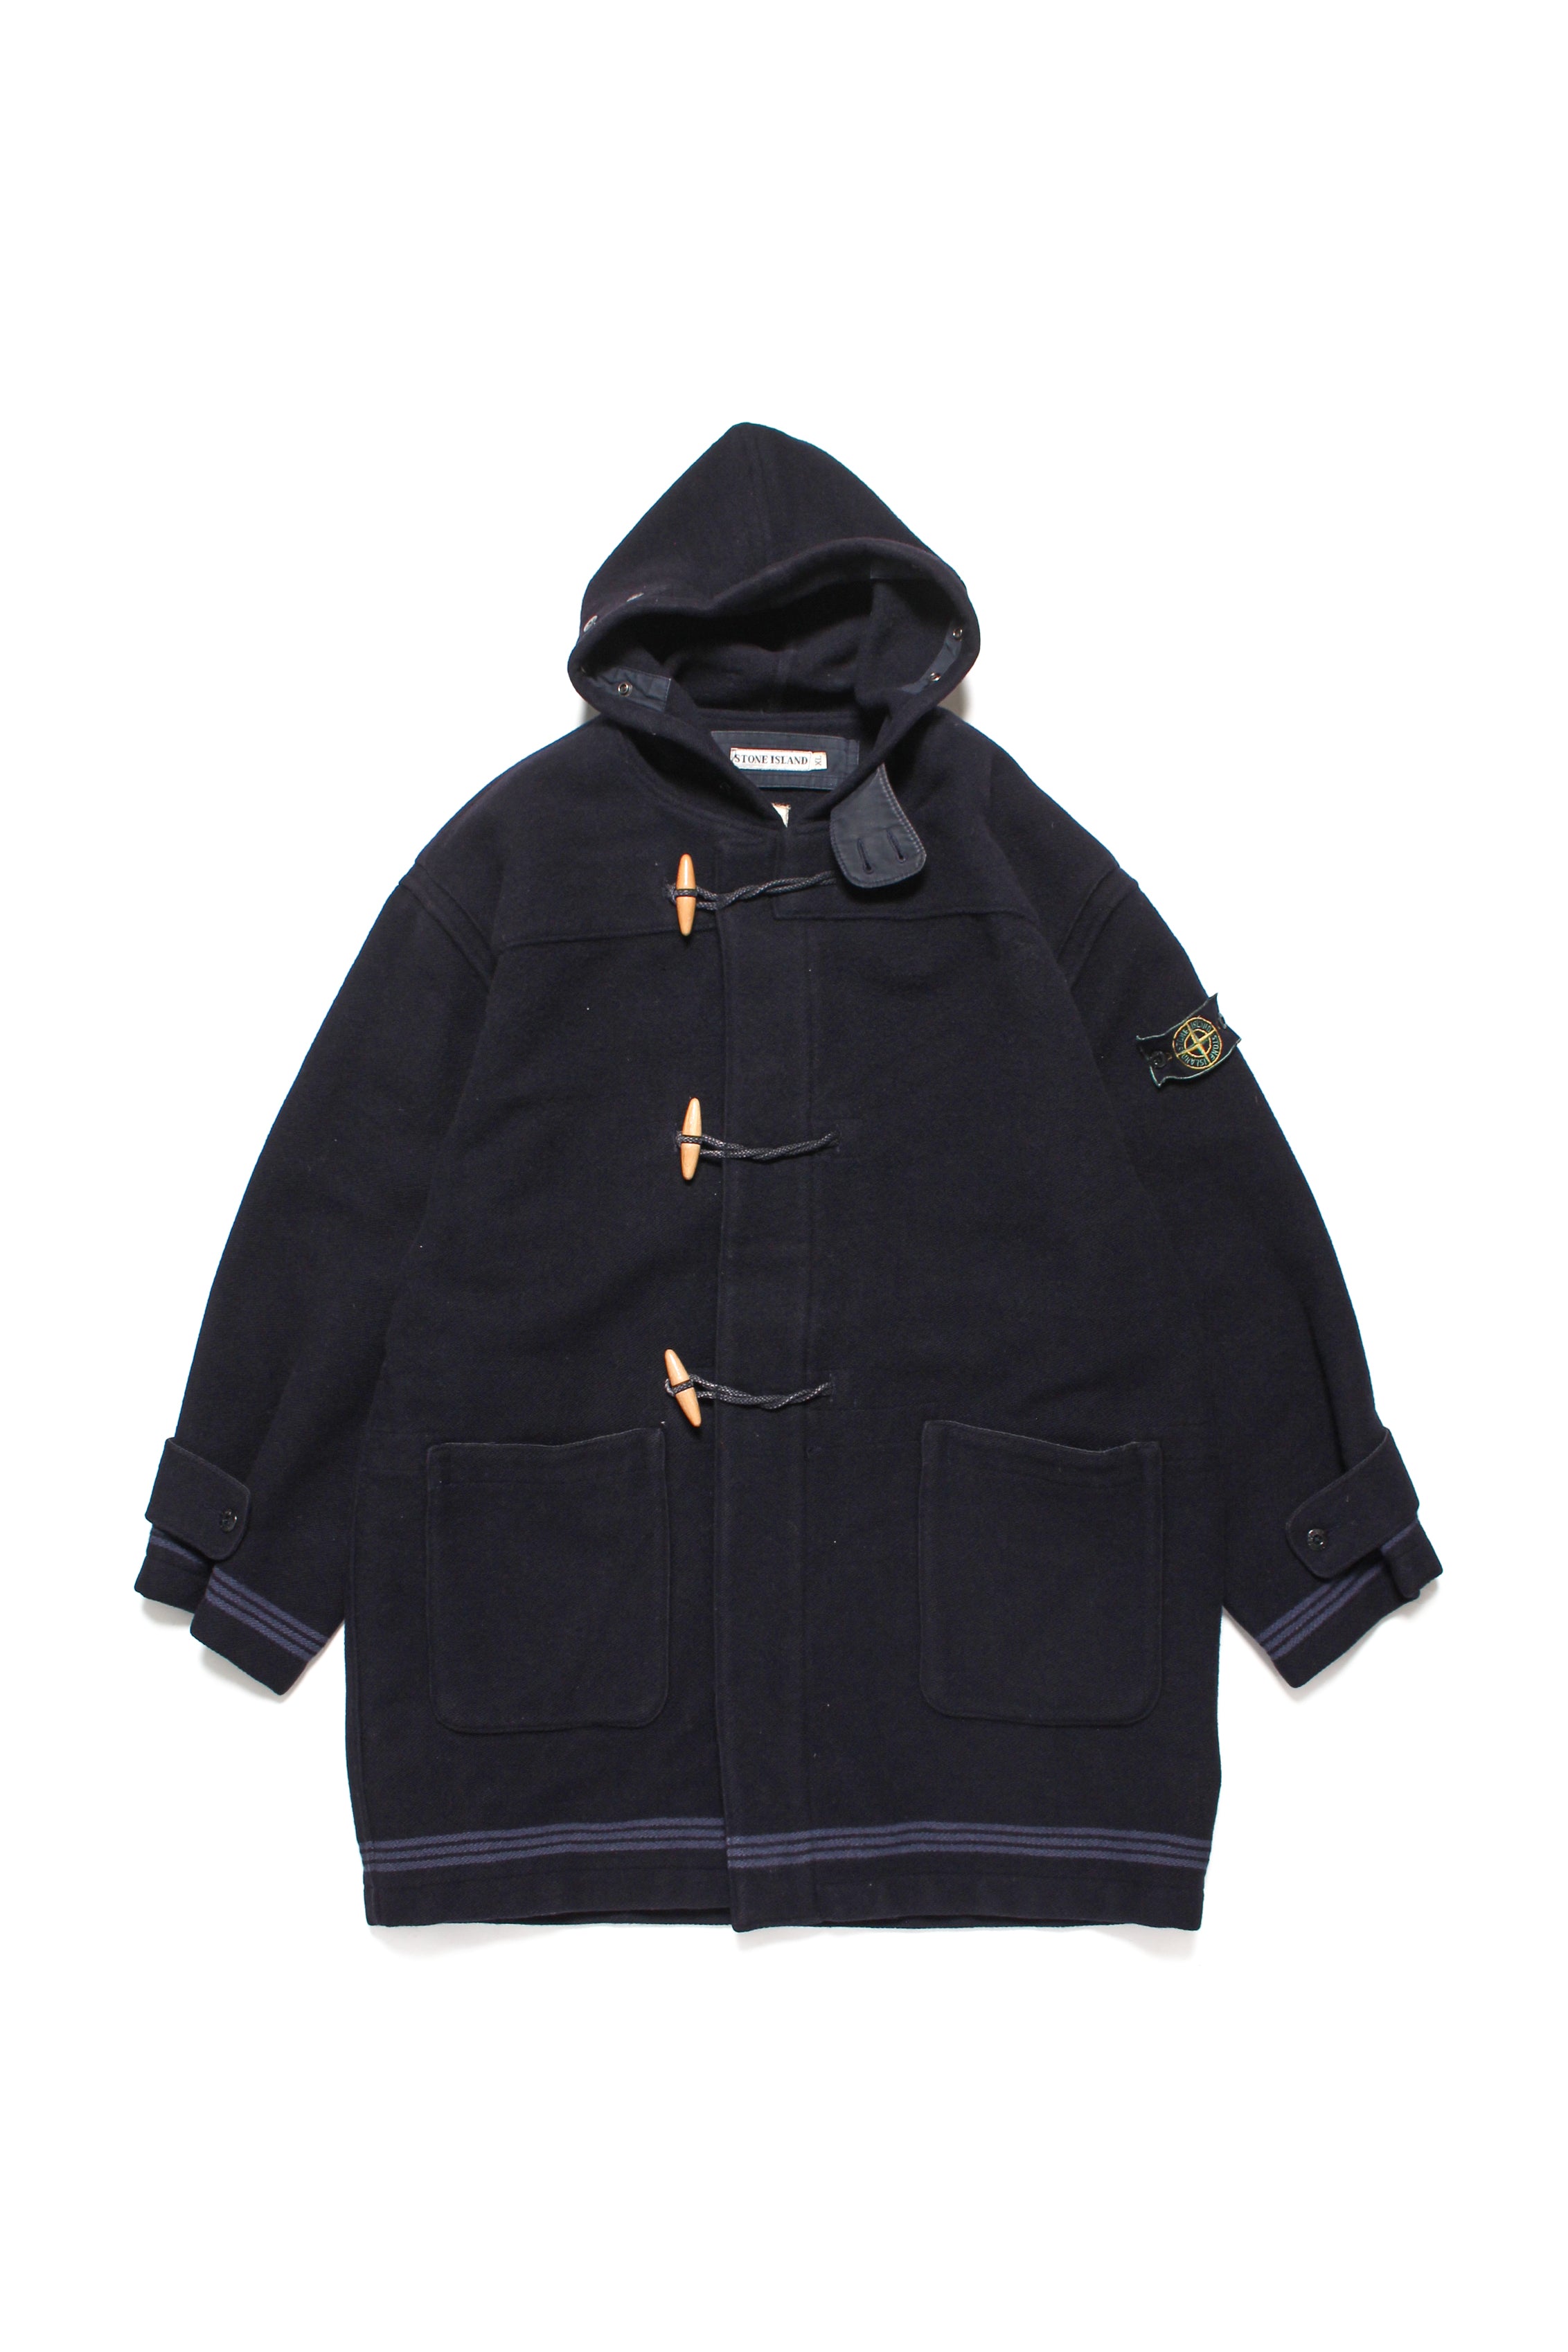 USED in STOCK】STONE ISLAND – DUFFLE COAT 80s – C30 - BOW WOW 